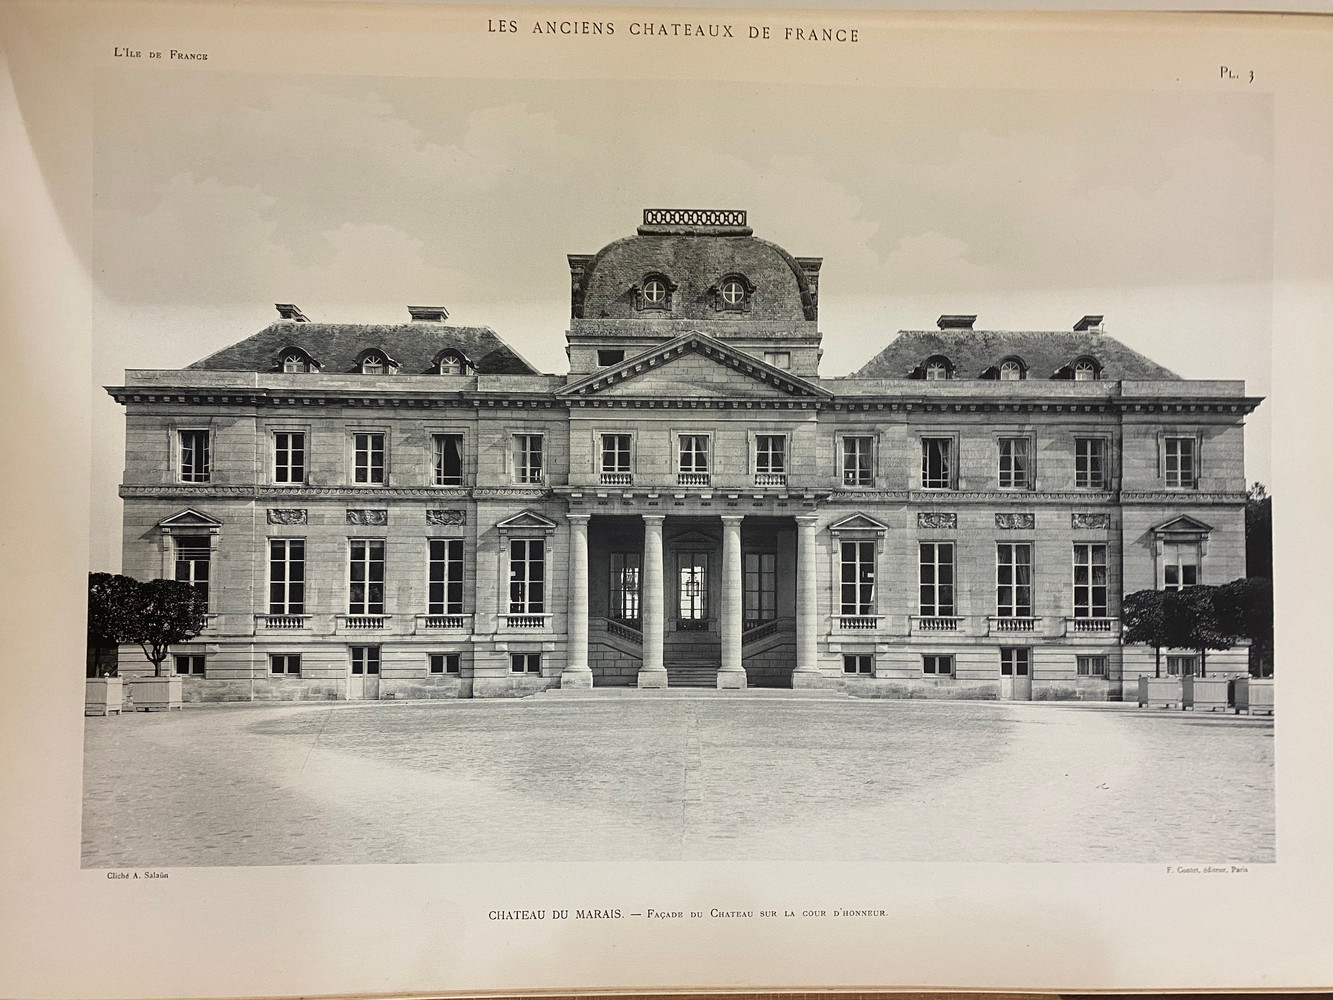 J. VACQUIER AND OTHERS. Les Anciens Chateaux de France, 1913 and 3 others. - Image 9 of 9